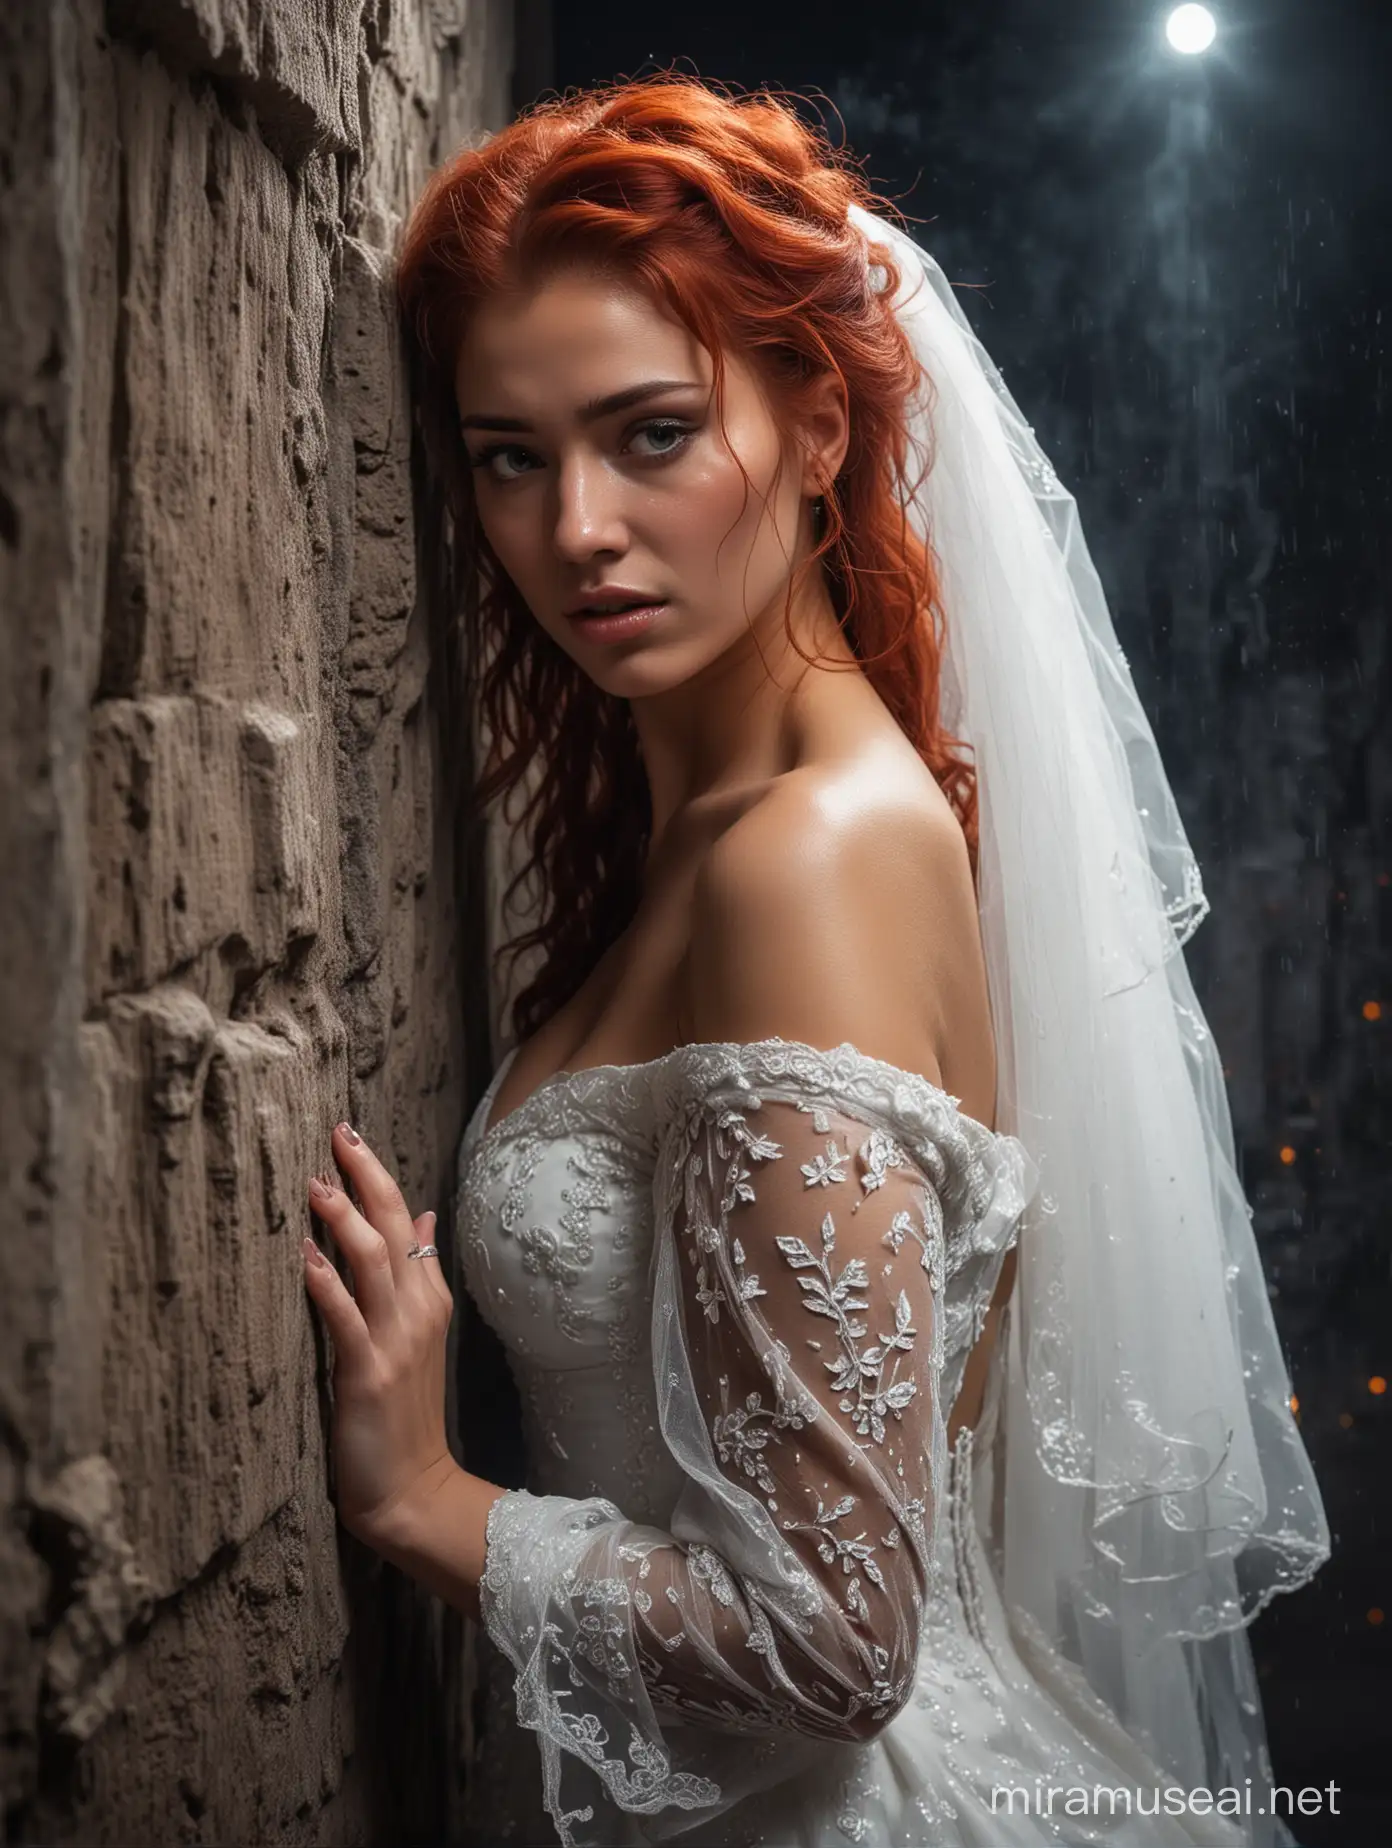 A beautiful red haur lady in a bridal tears, hiding behind a wall in tears, with a wicked young man standing close to the wall, searching at night